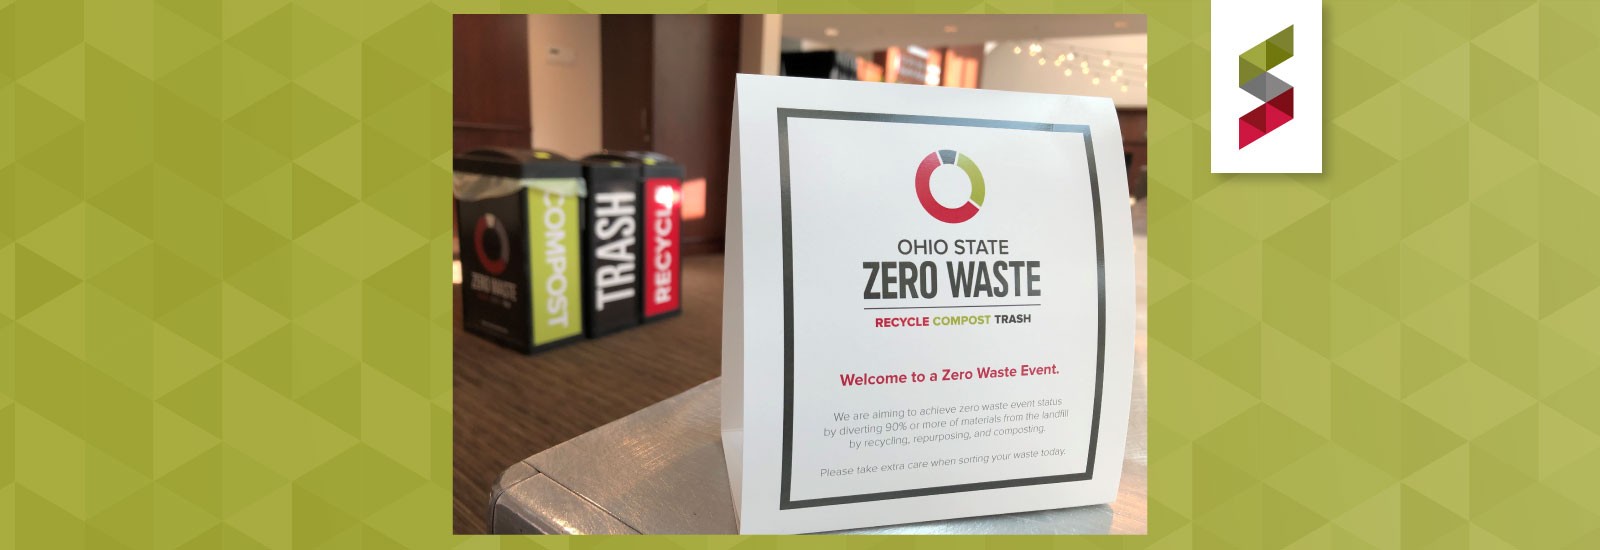 Zero Waste sign on a table